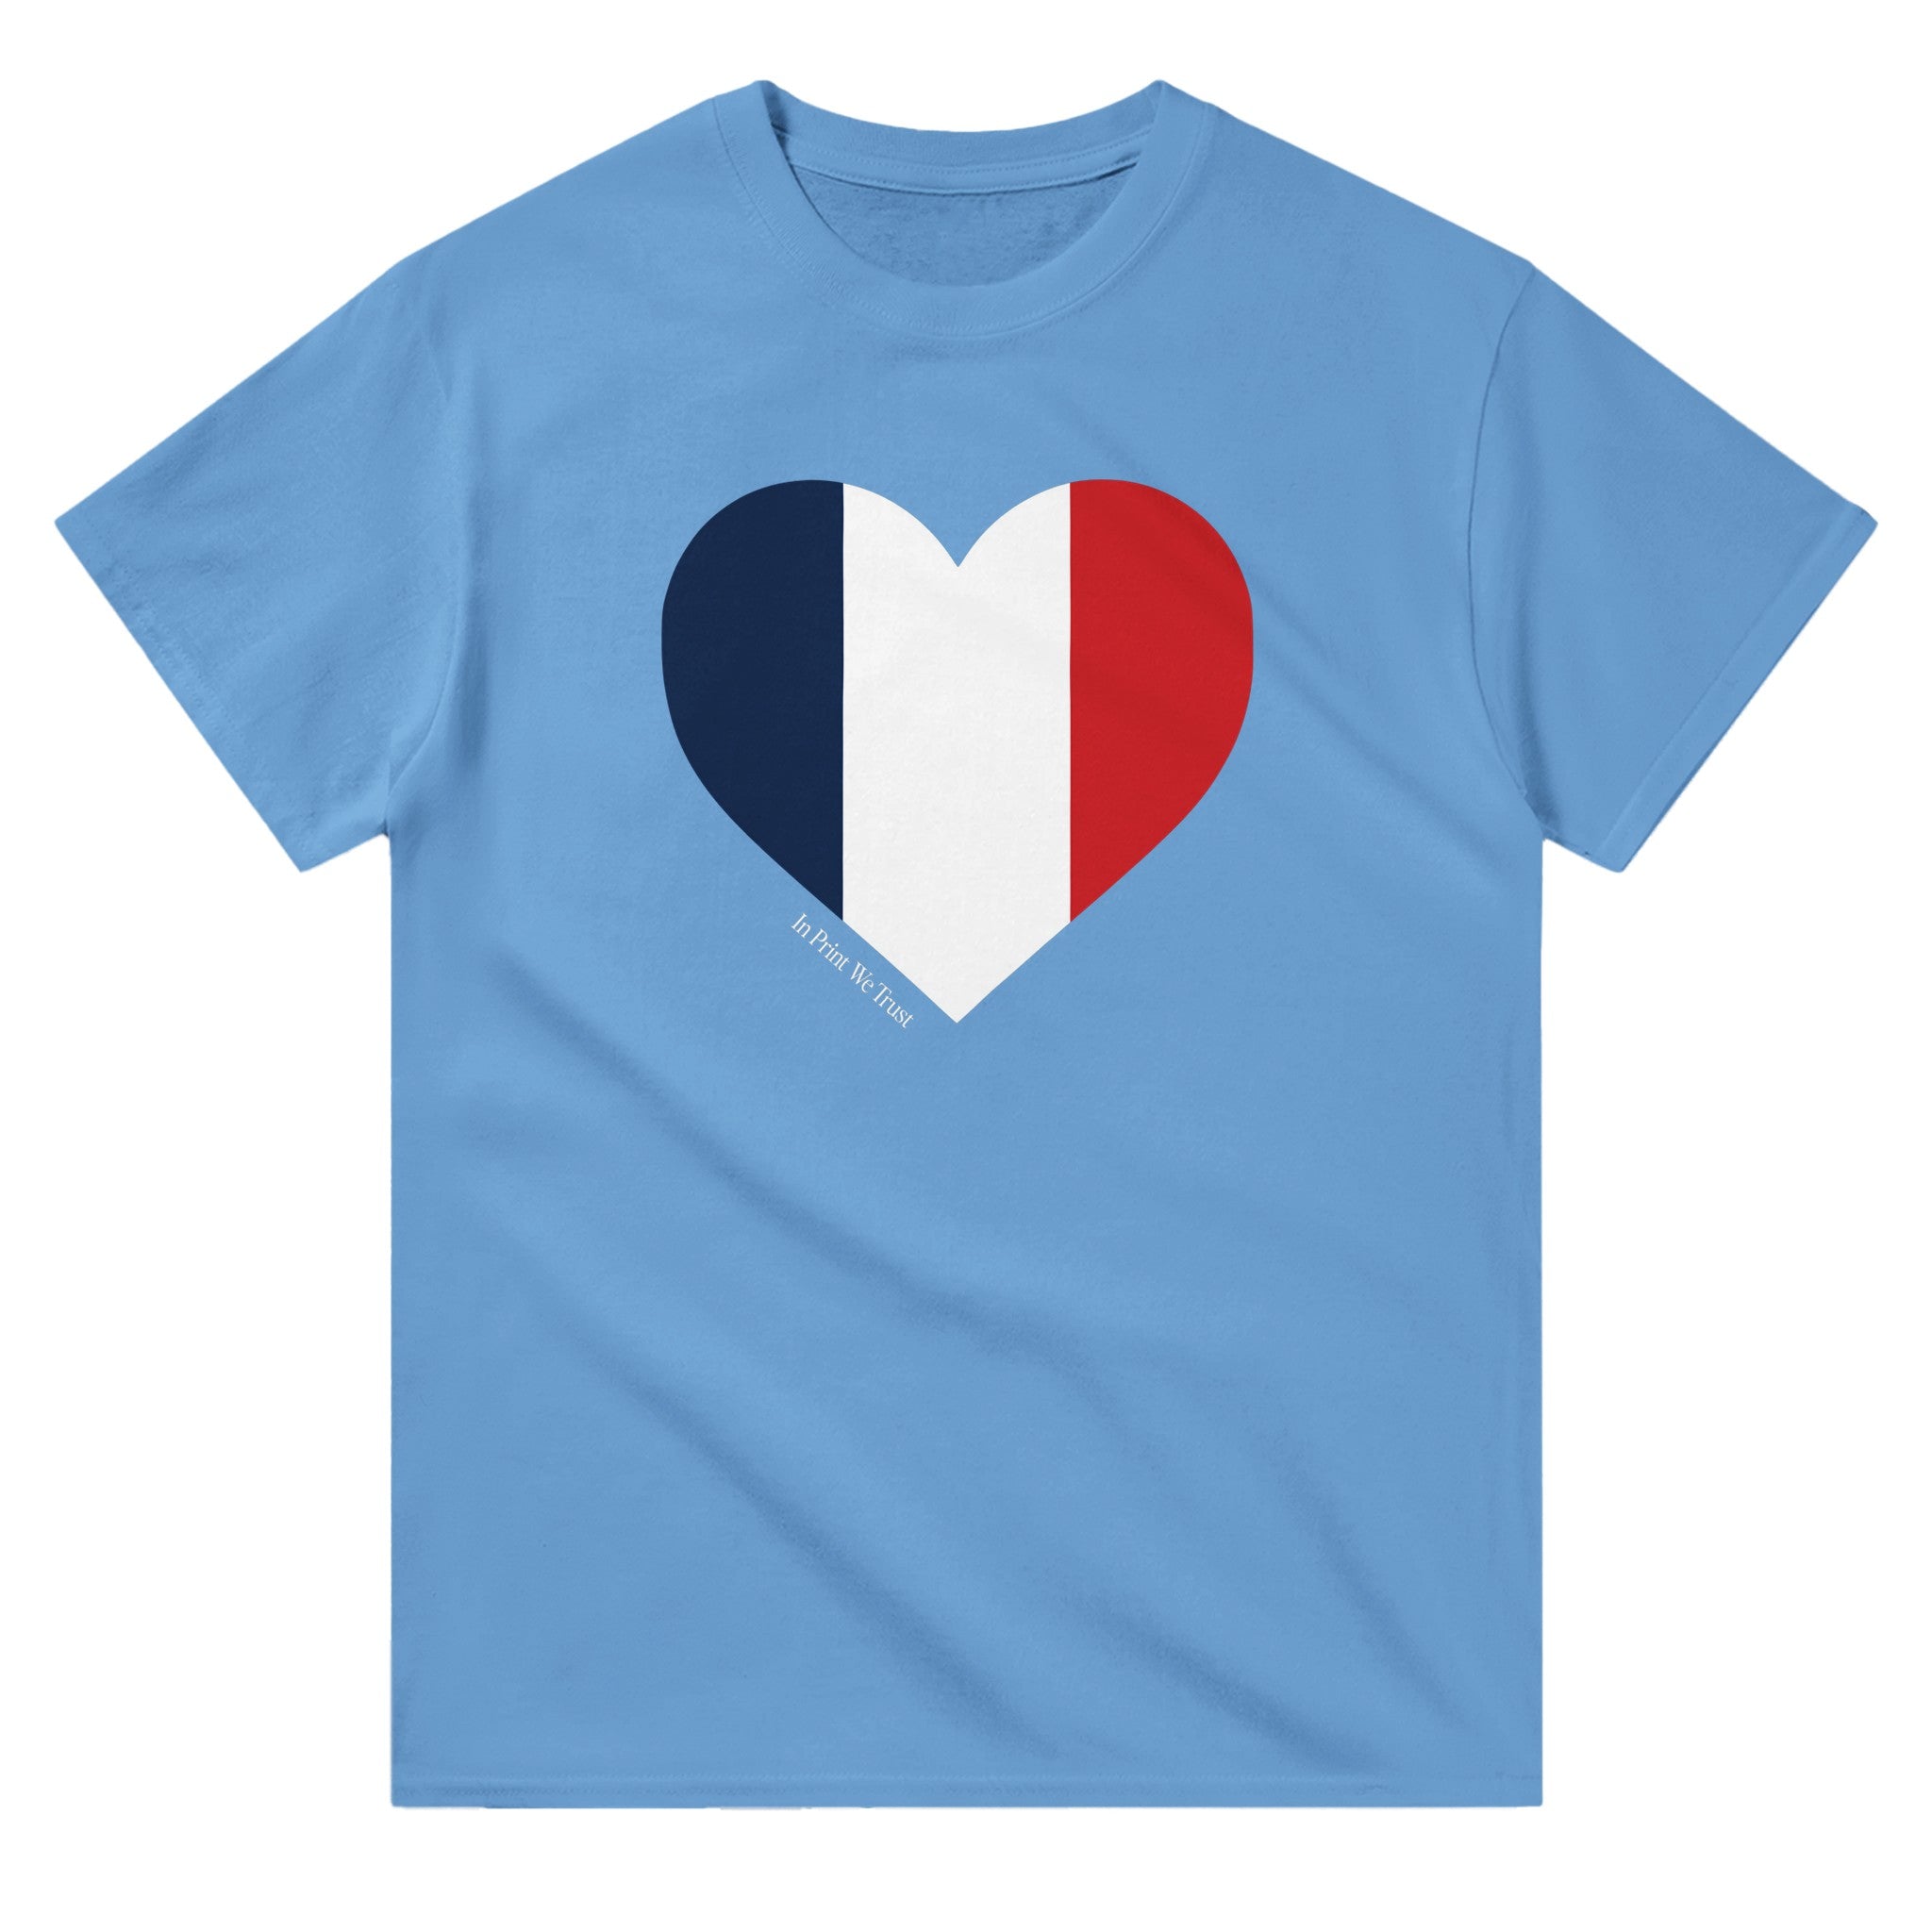 'France' classic tee - In Print We Trust